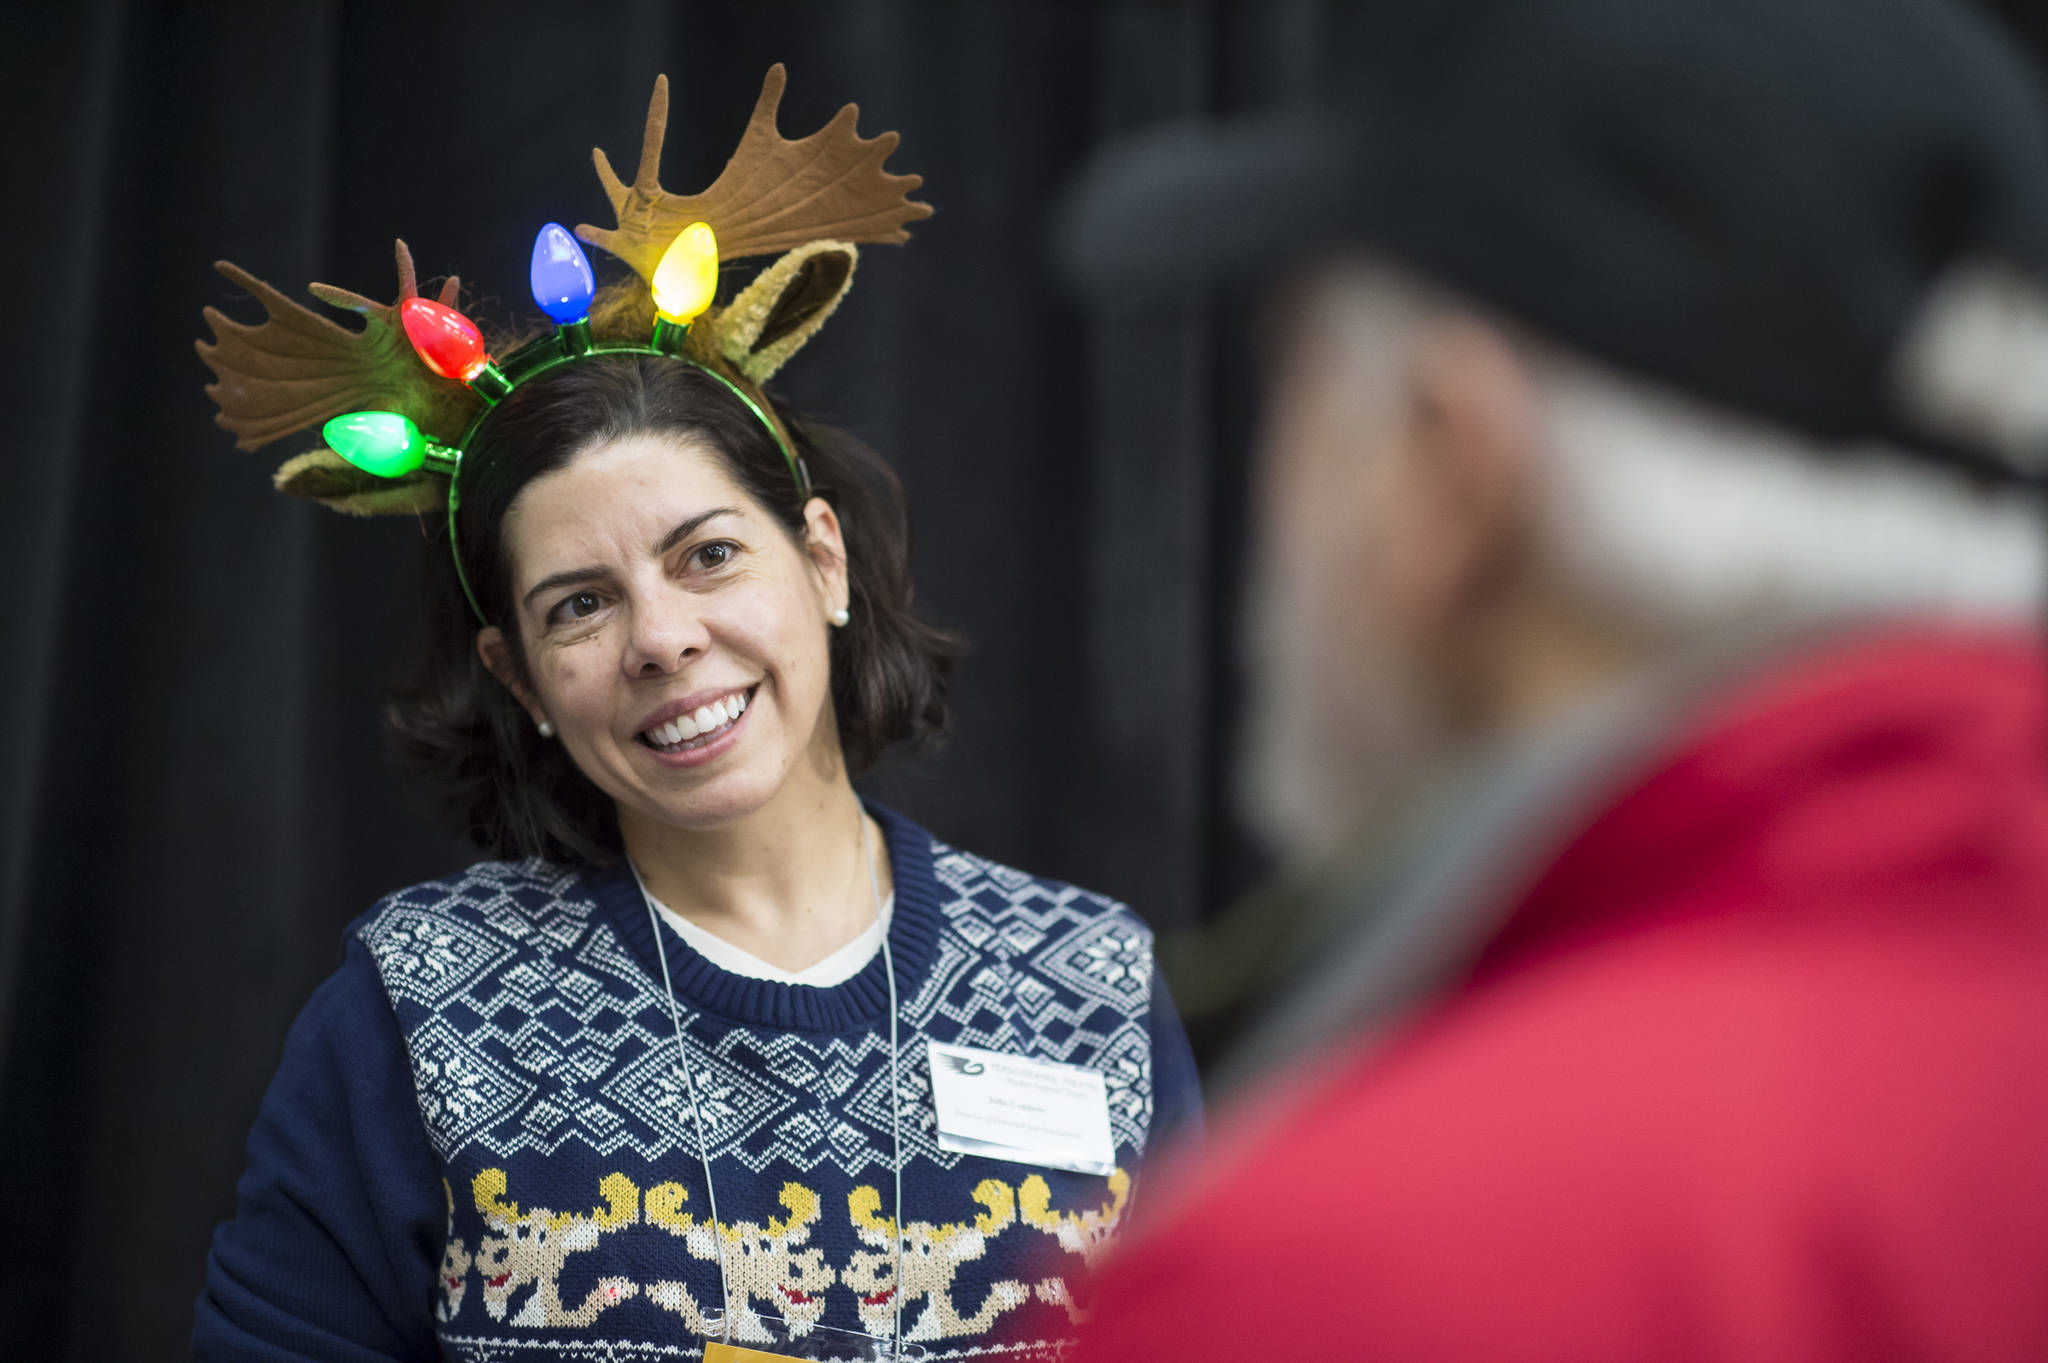 Julie York Coppens, Director of Outreach and Engagement for Perseverance Theatre, mans the theater’s booth at the Public Market in the Elizabeth Peratrovich Hall on Friday, Nov. 23, 2018. (Michael Penn | Juneau Empire)